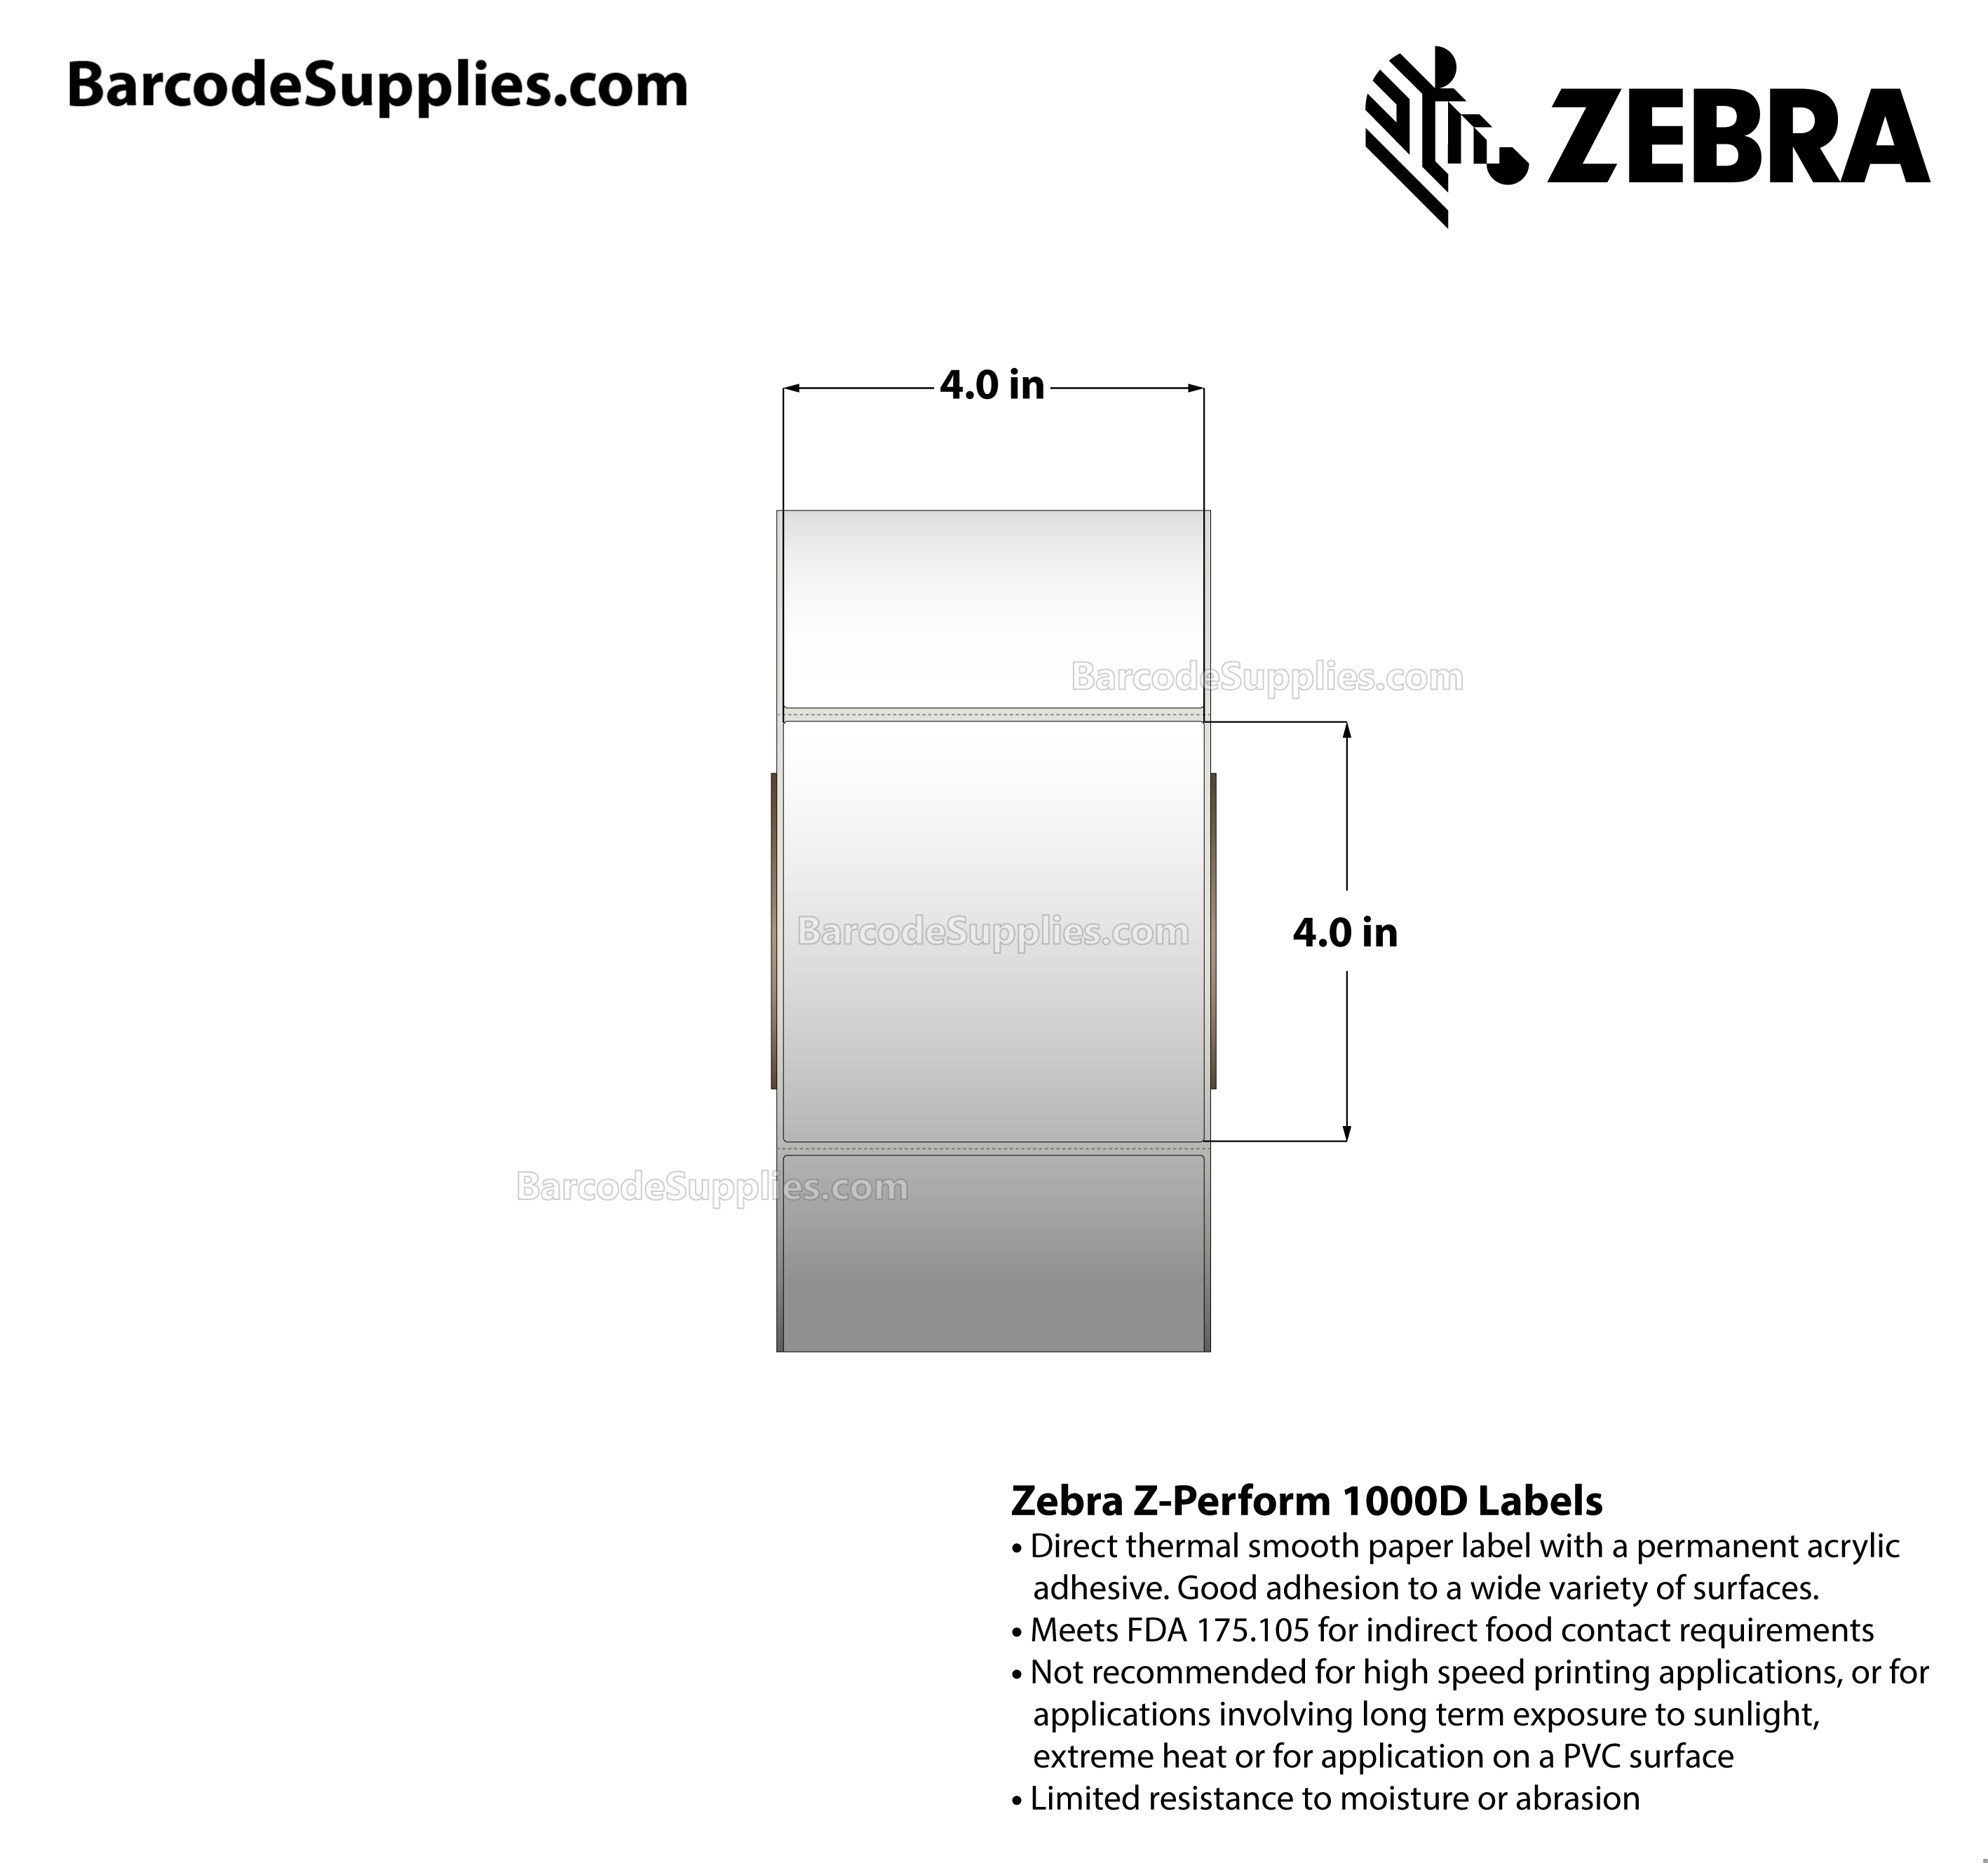 4 x 4 Direct Thermal White Z-Perform 1000D Labels With Permanent Adhesive - Perforated - 1425 Labels Per Roll - Carton Of 4 Rolls - 5700 Labels Total - MPN: 10028311